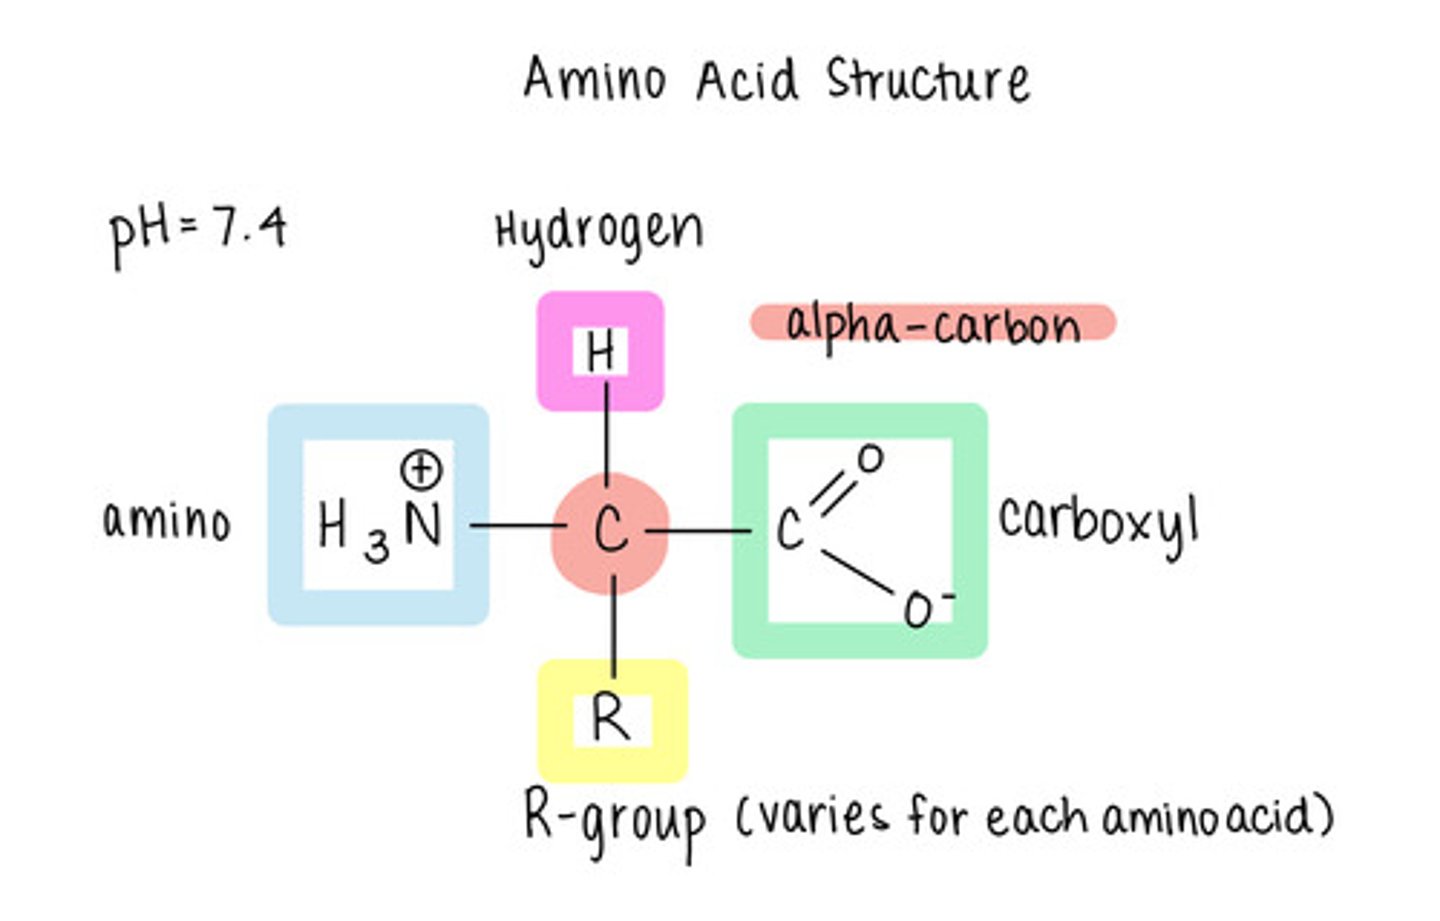 <p>hydrogen atom (H), amino group (NH2), carboxyl group (COOH), and an "R group"</p>